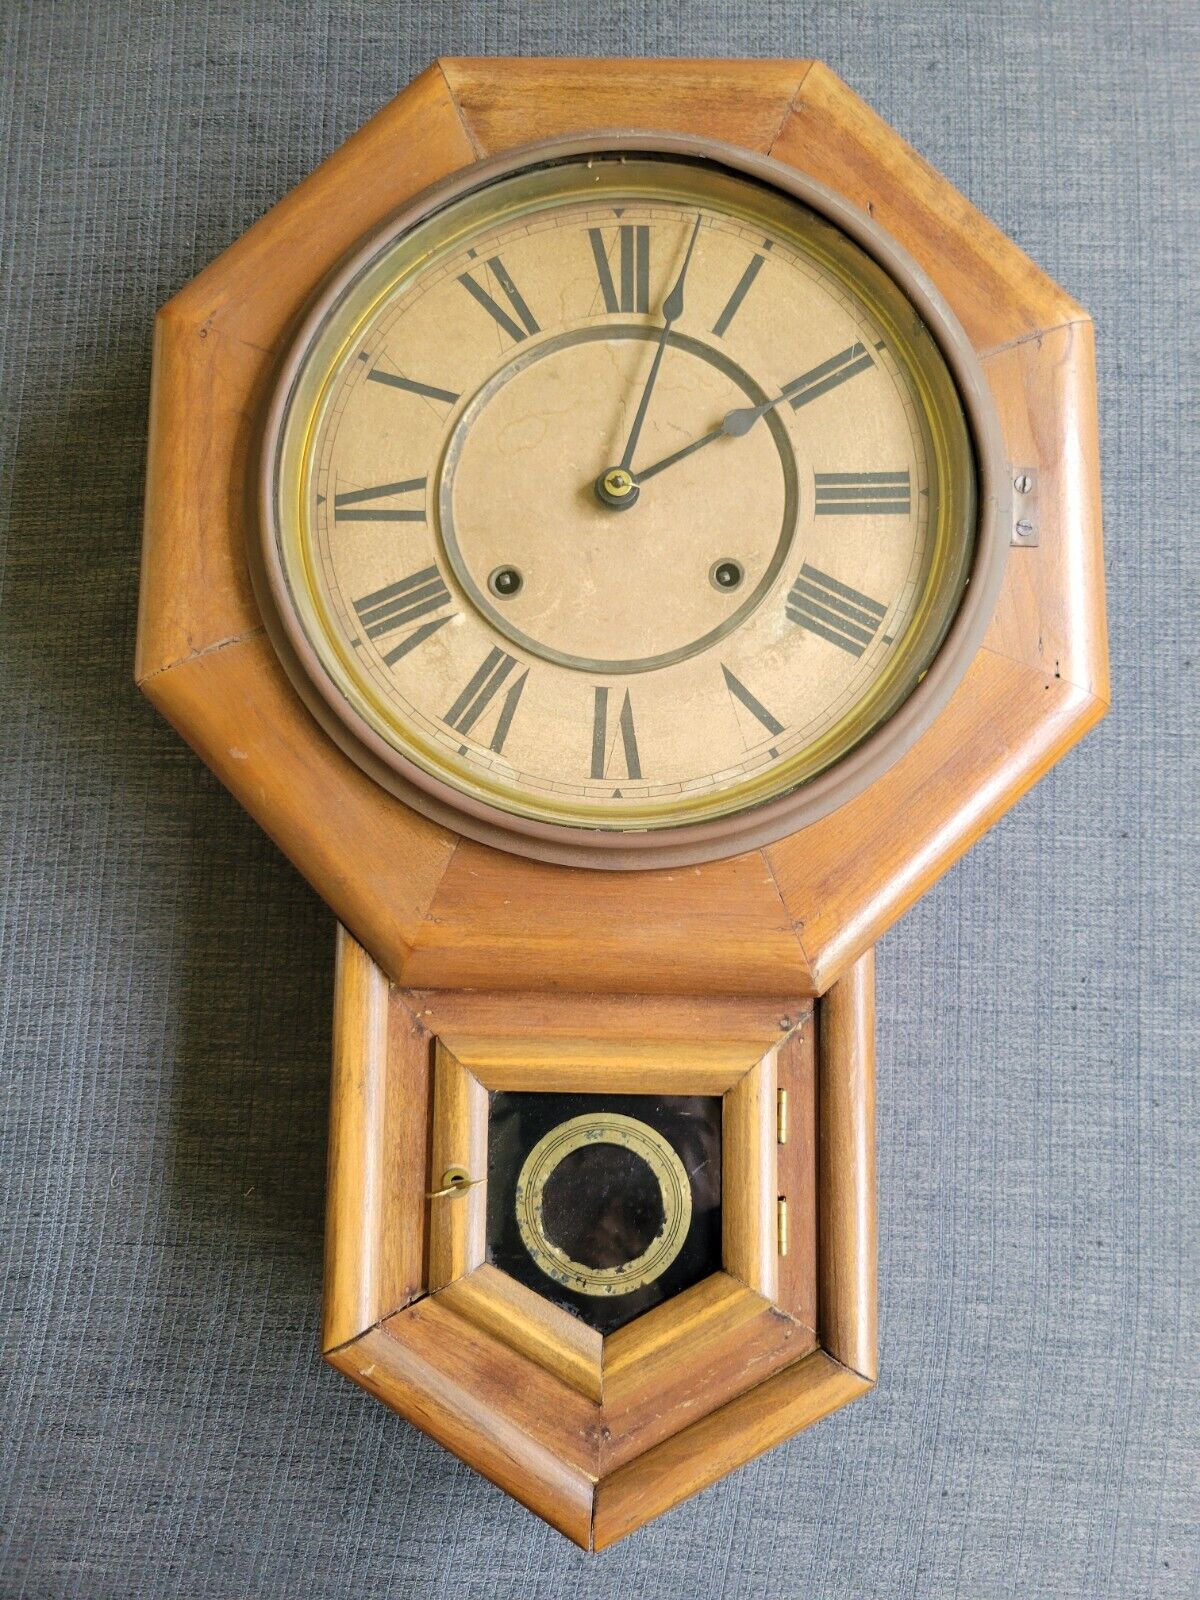 Antique Circa 1900 Octagon Schoolhouse Clock Tested In Working Condition.